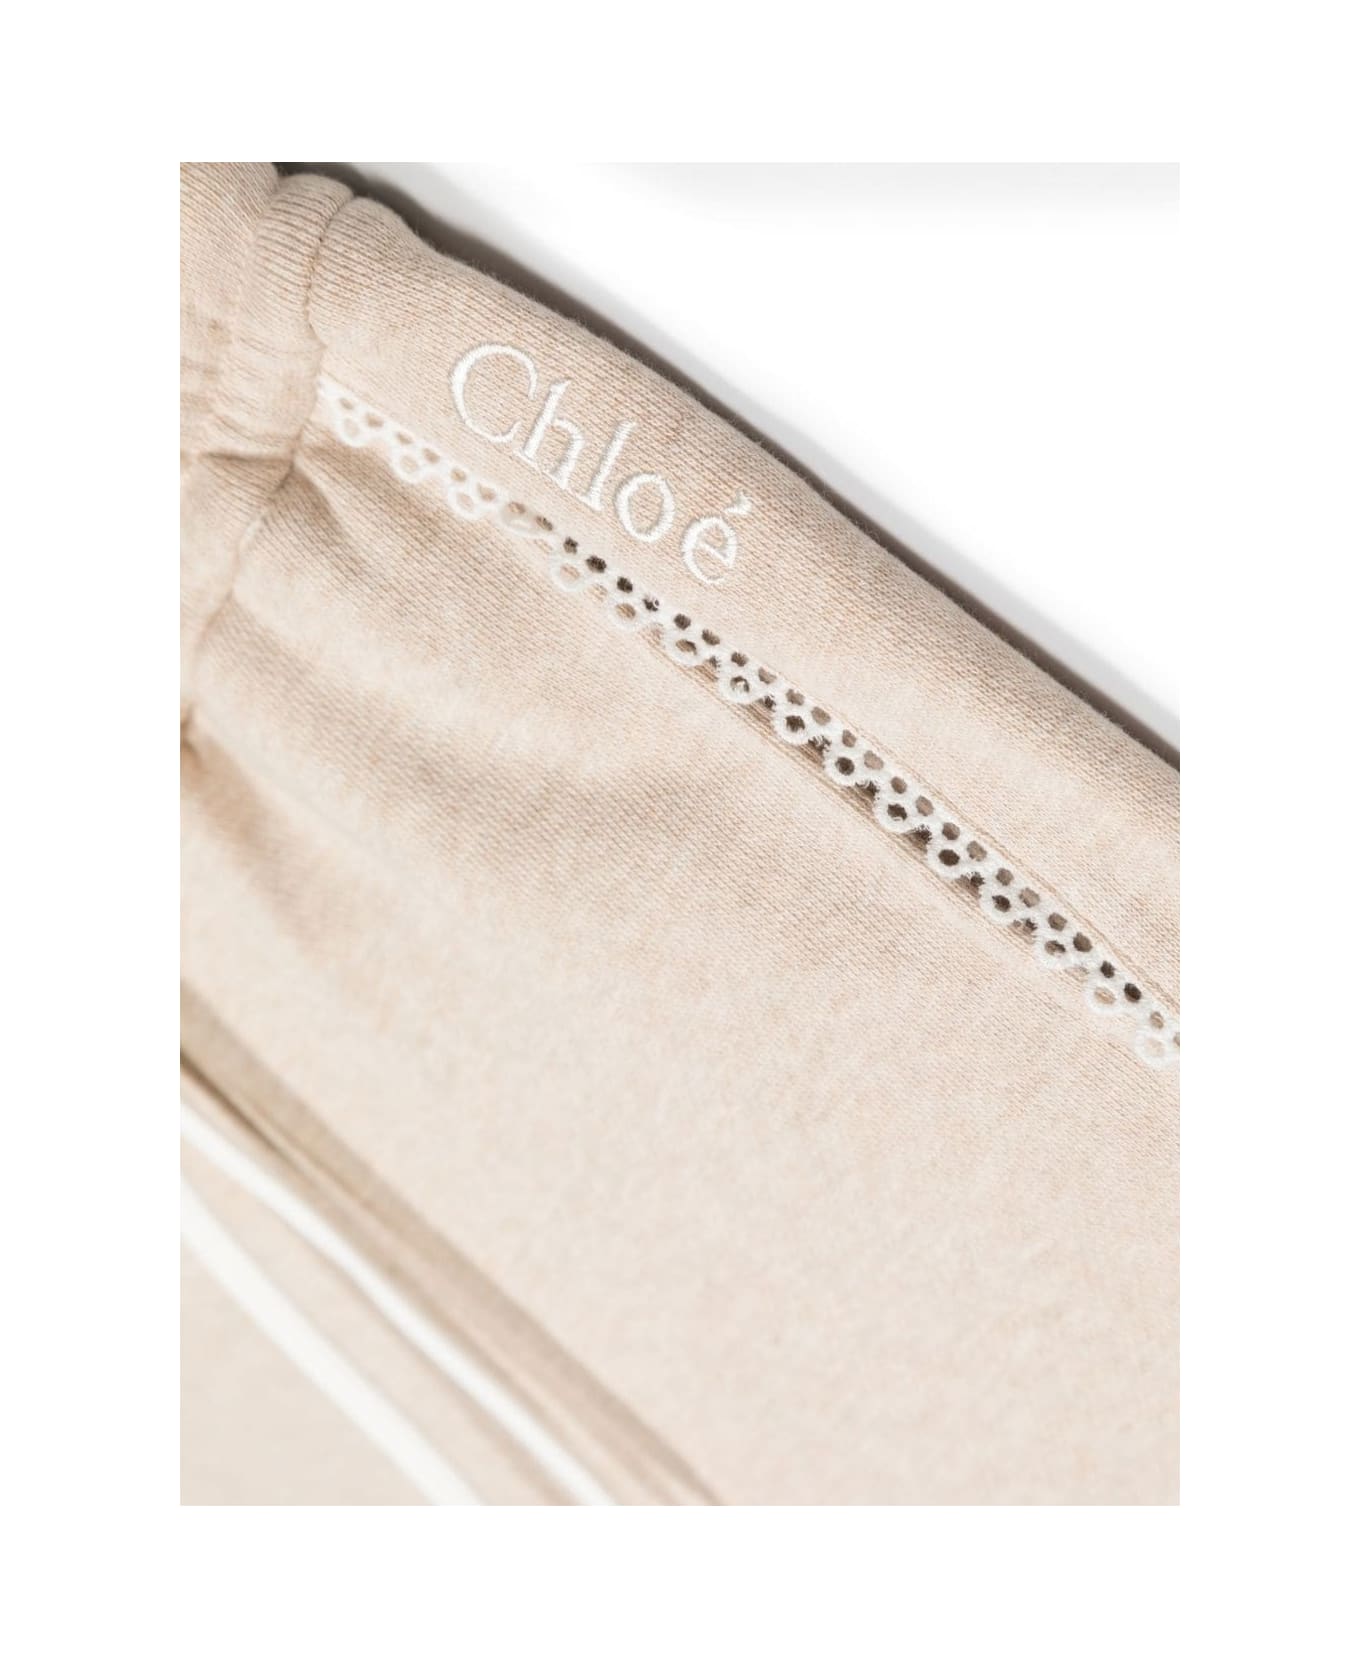 Chloé Shorts With Embroidered Logo In Cotton Girl - Beige